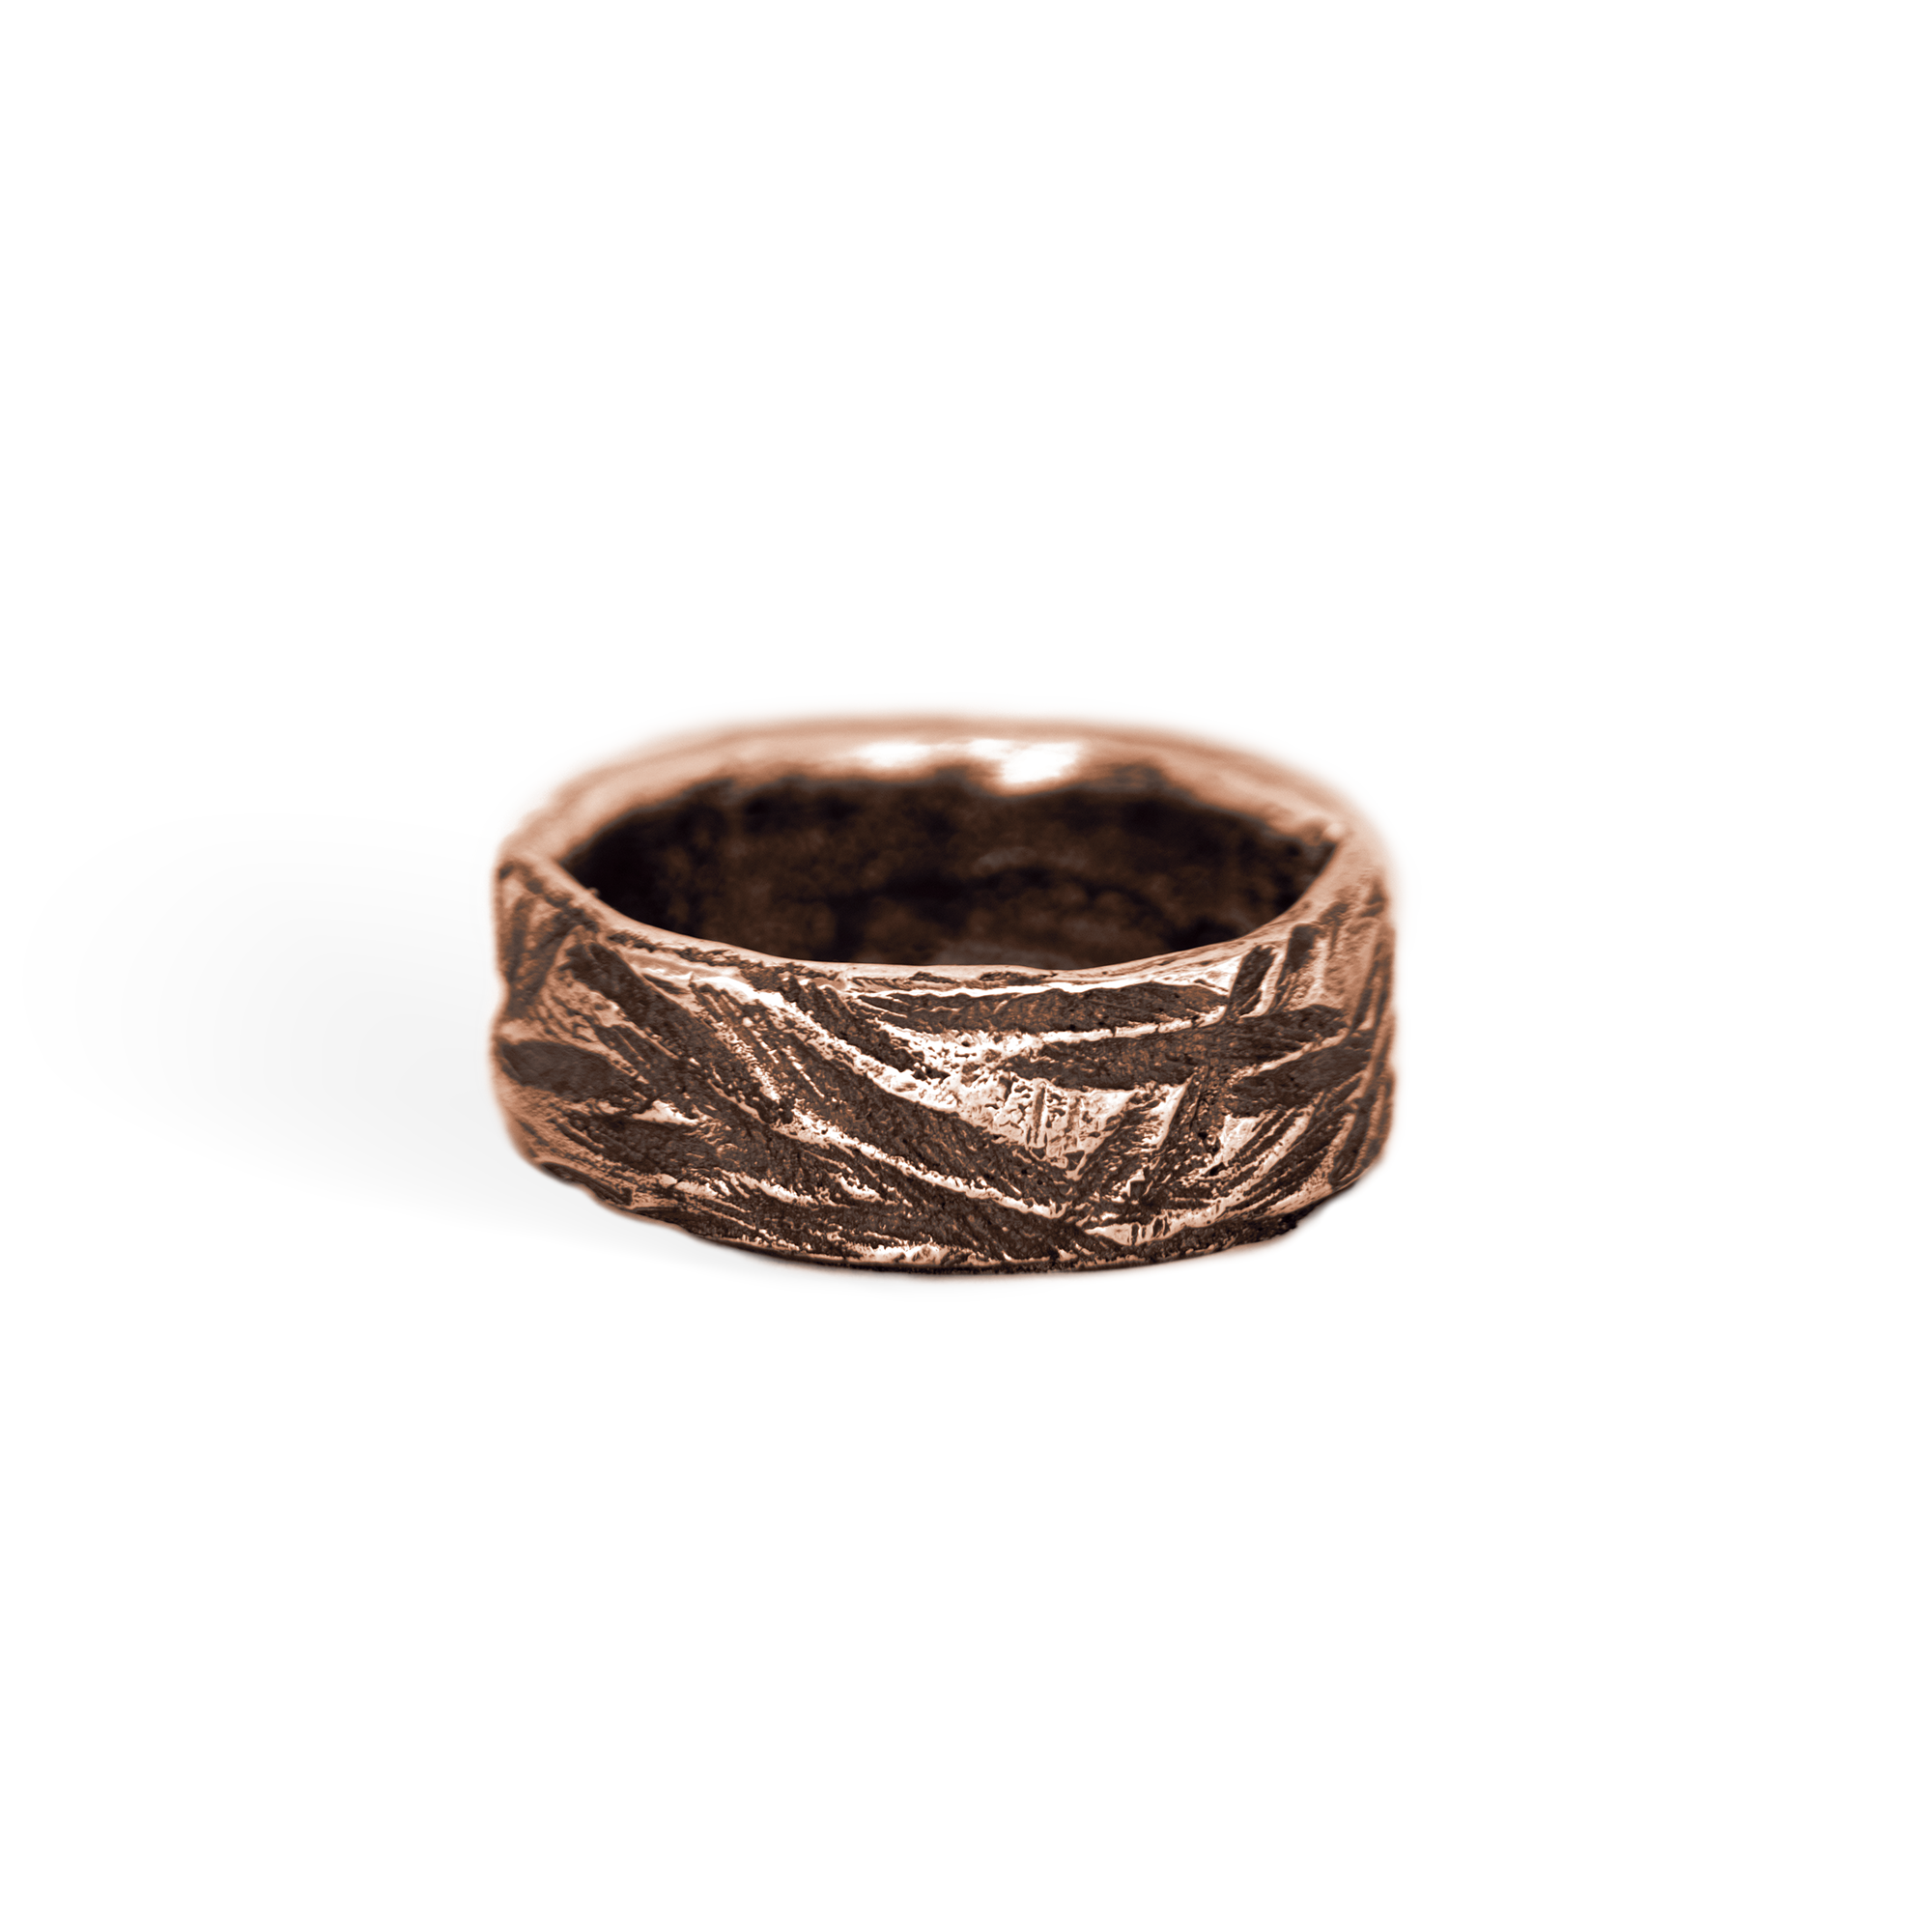 Ropes Ring - Etched